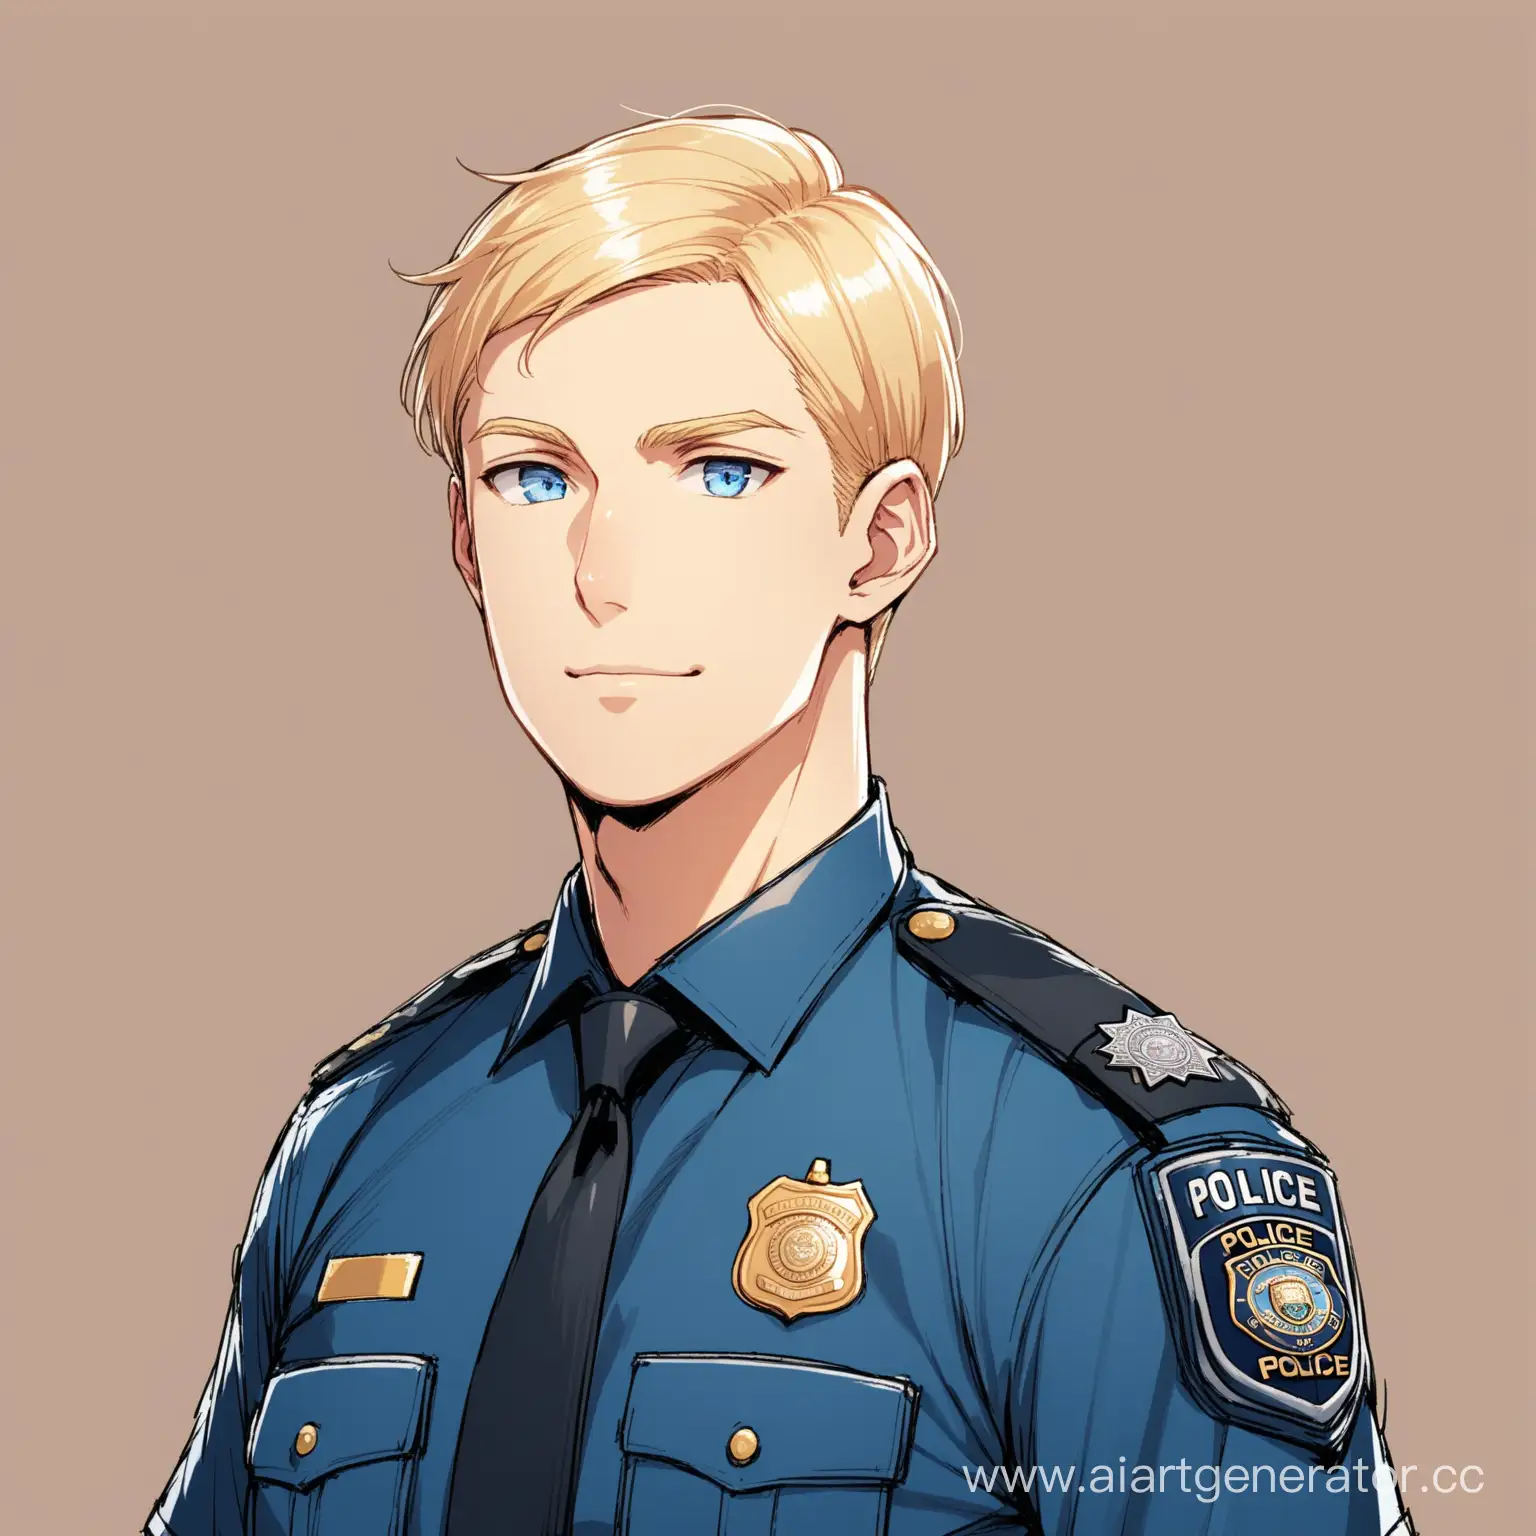 A tall adult man, short blond hair, blue eyes, dressed in a police uniform, He looks relaxed.